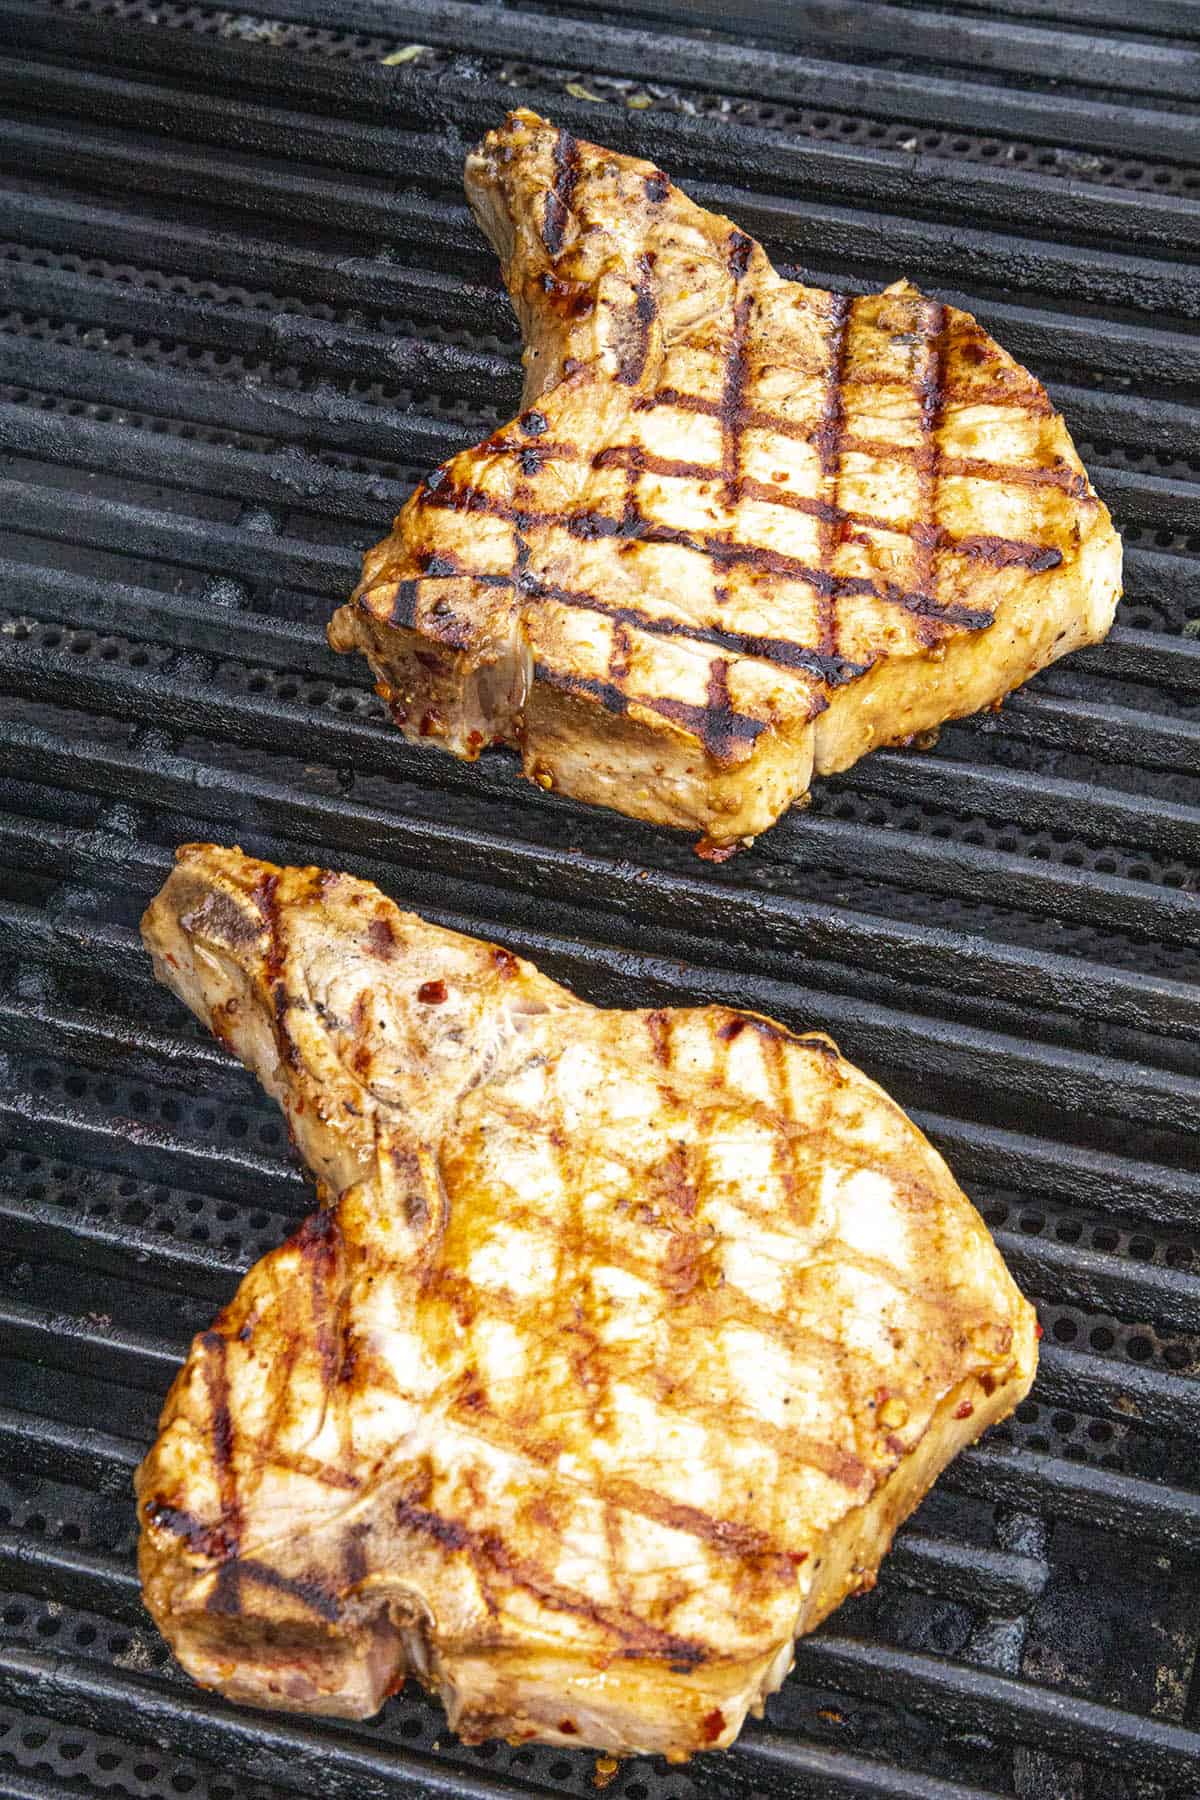 Grilling up marinated pork chops on the grill